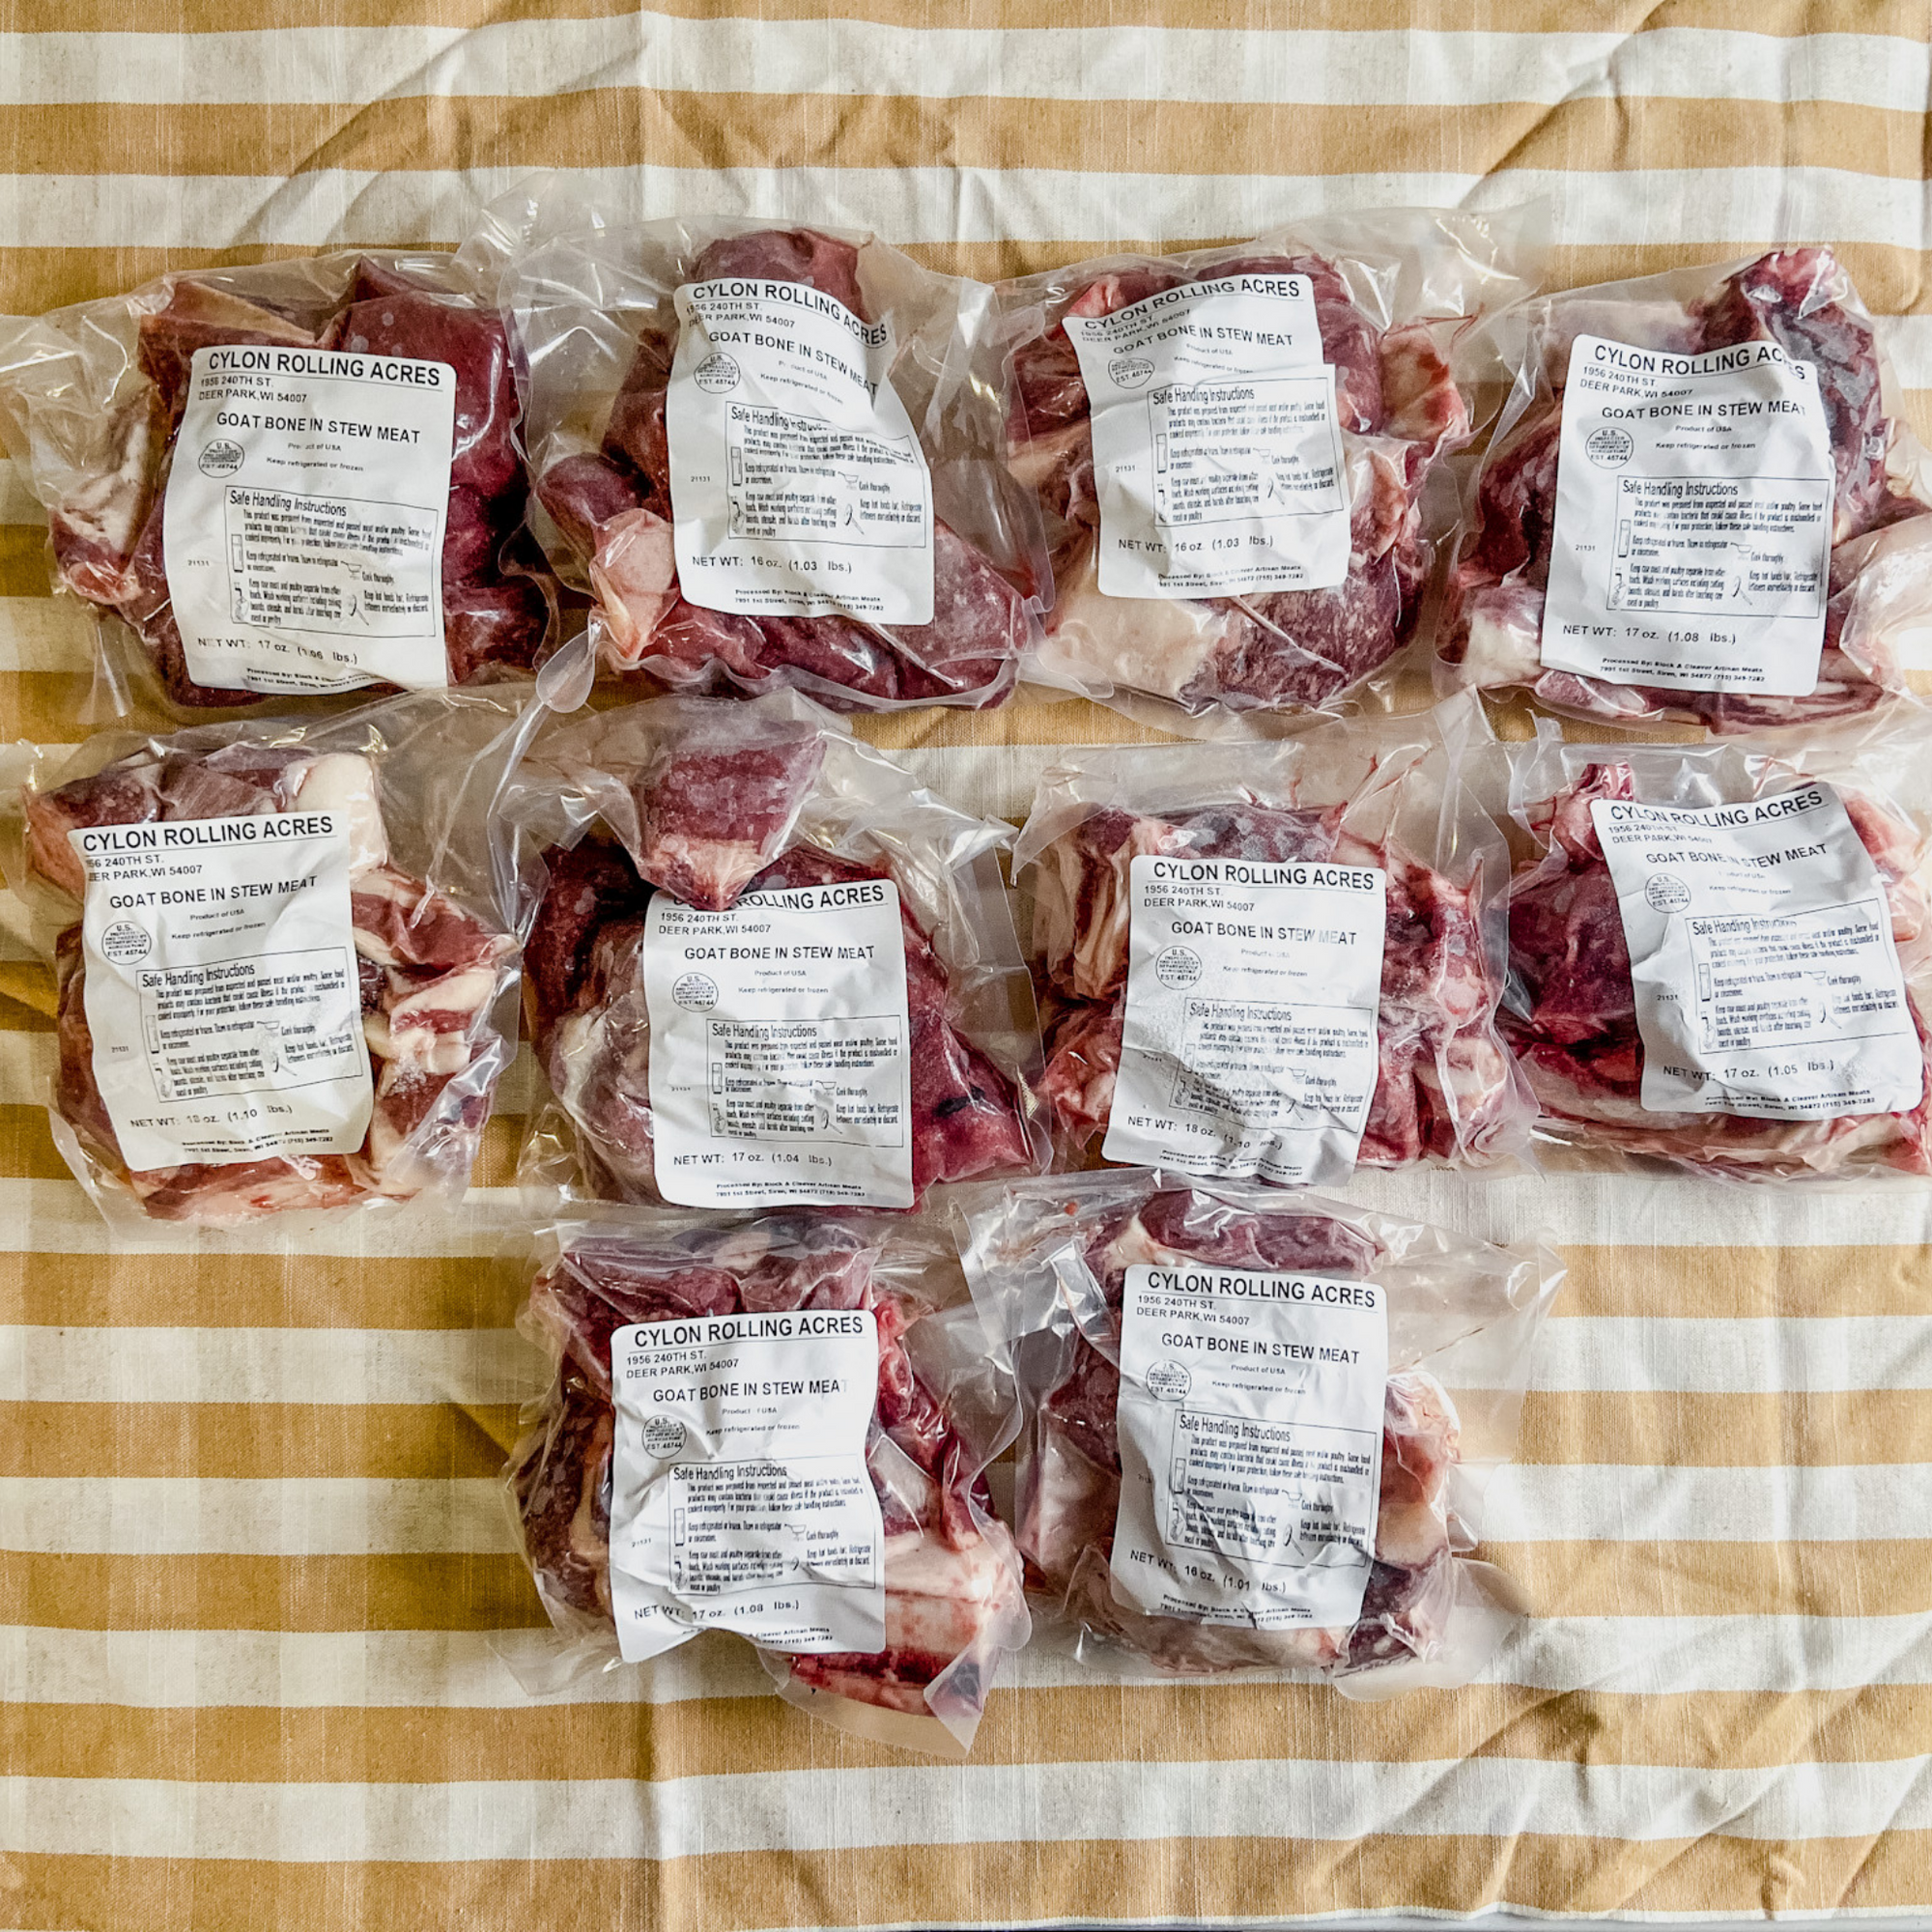 10 pounds of packaged goat bone stew meat for sale.